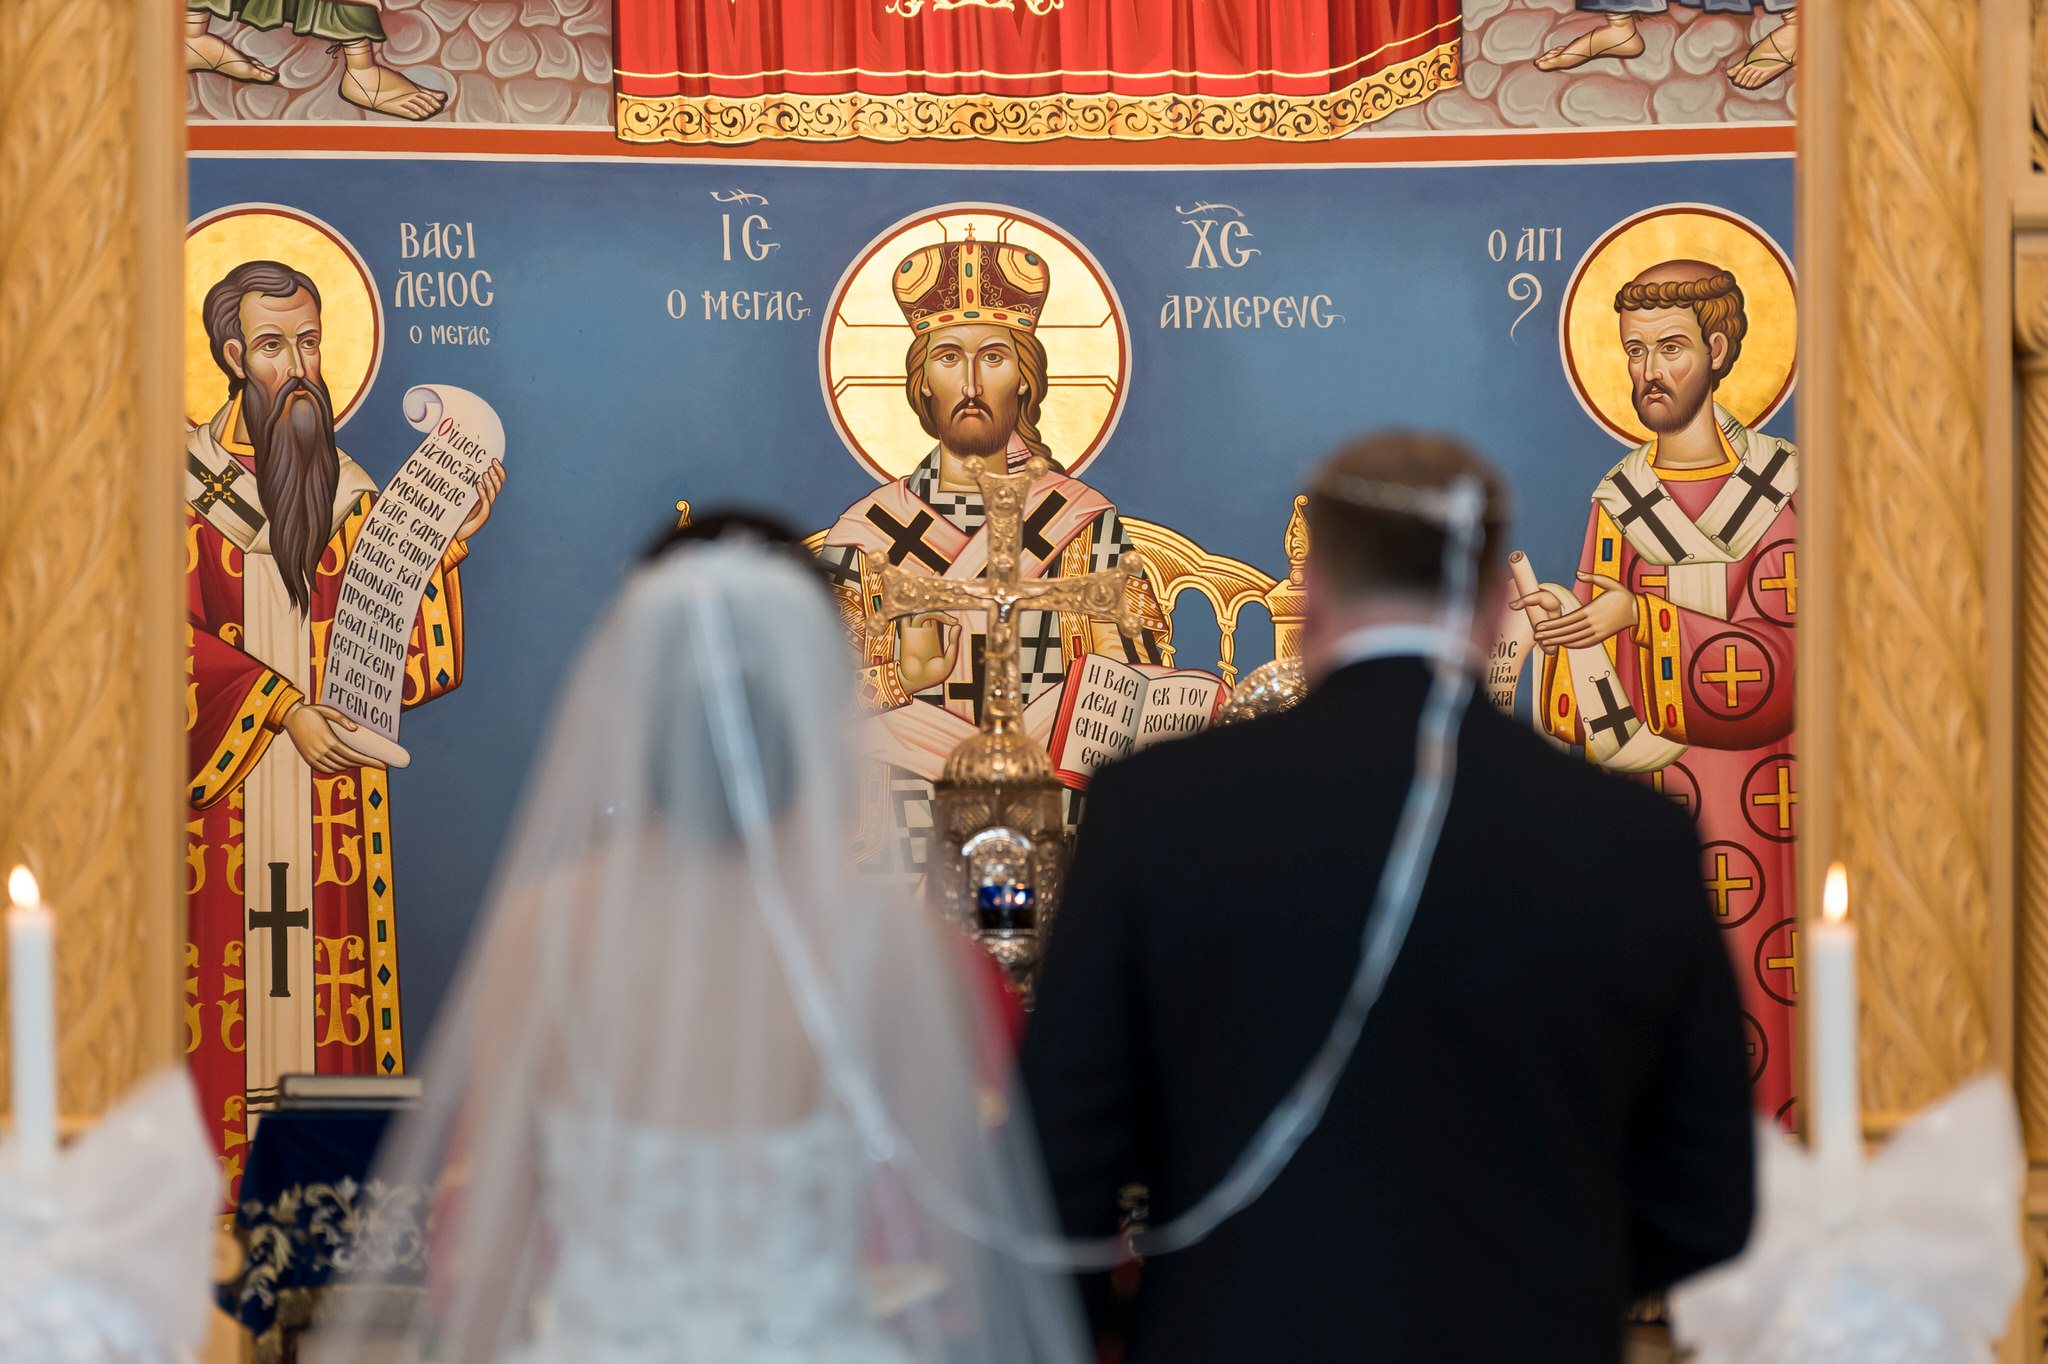 Jesus iconography at the altar of Assumption Greek Orthodox wedding in St. Clair Shores, Michigan.